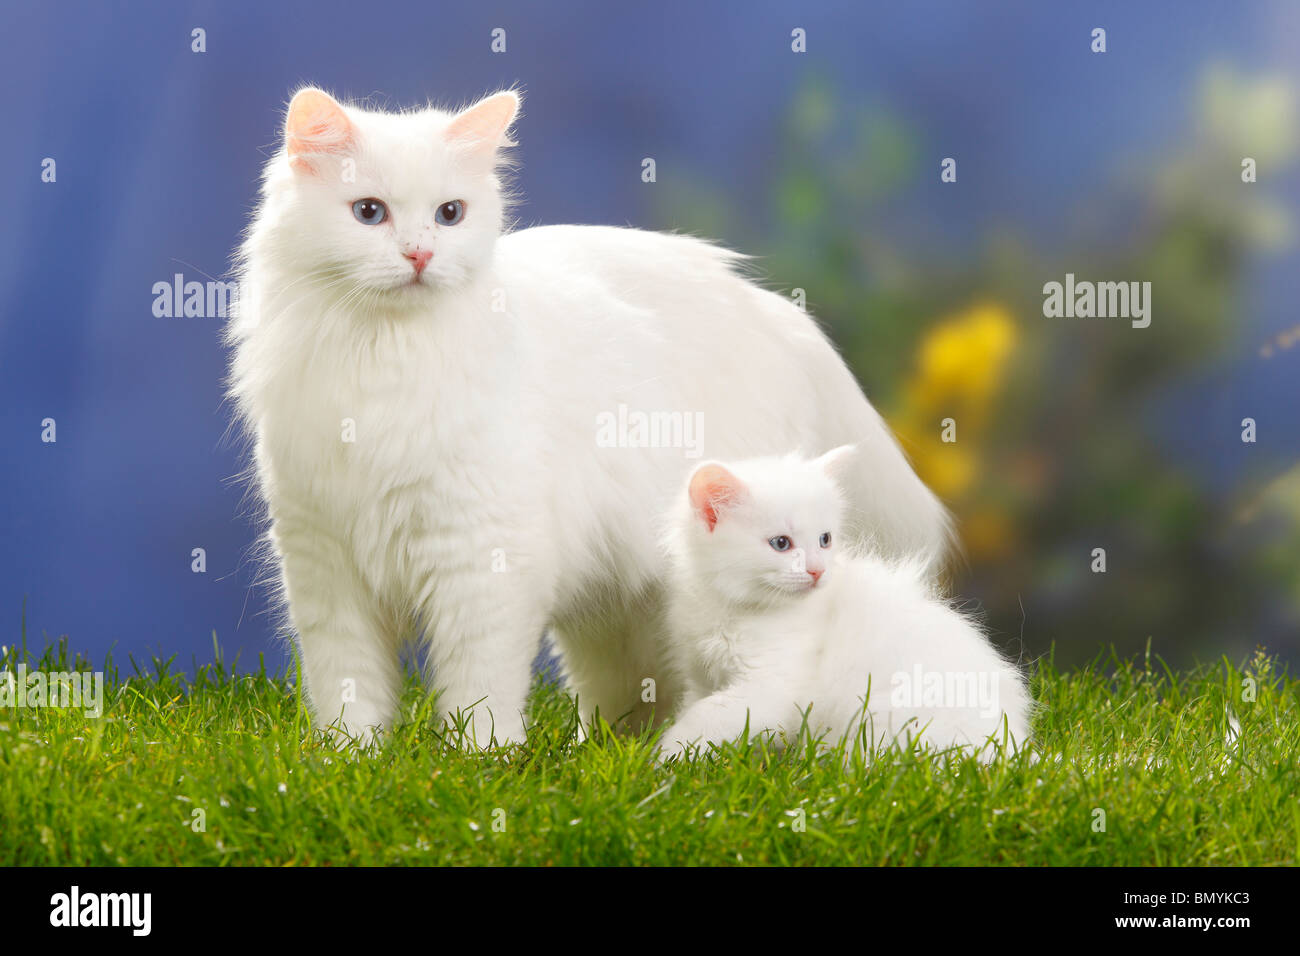 Siberian Forest Cat White With Kitten 7 Weeks Siberian Cat Stock Photo Alamy